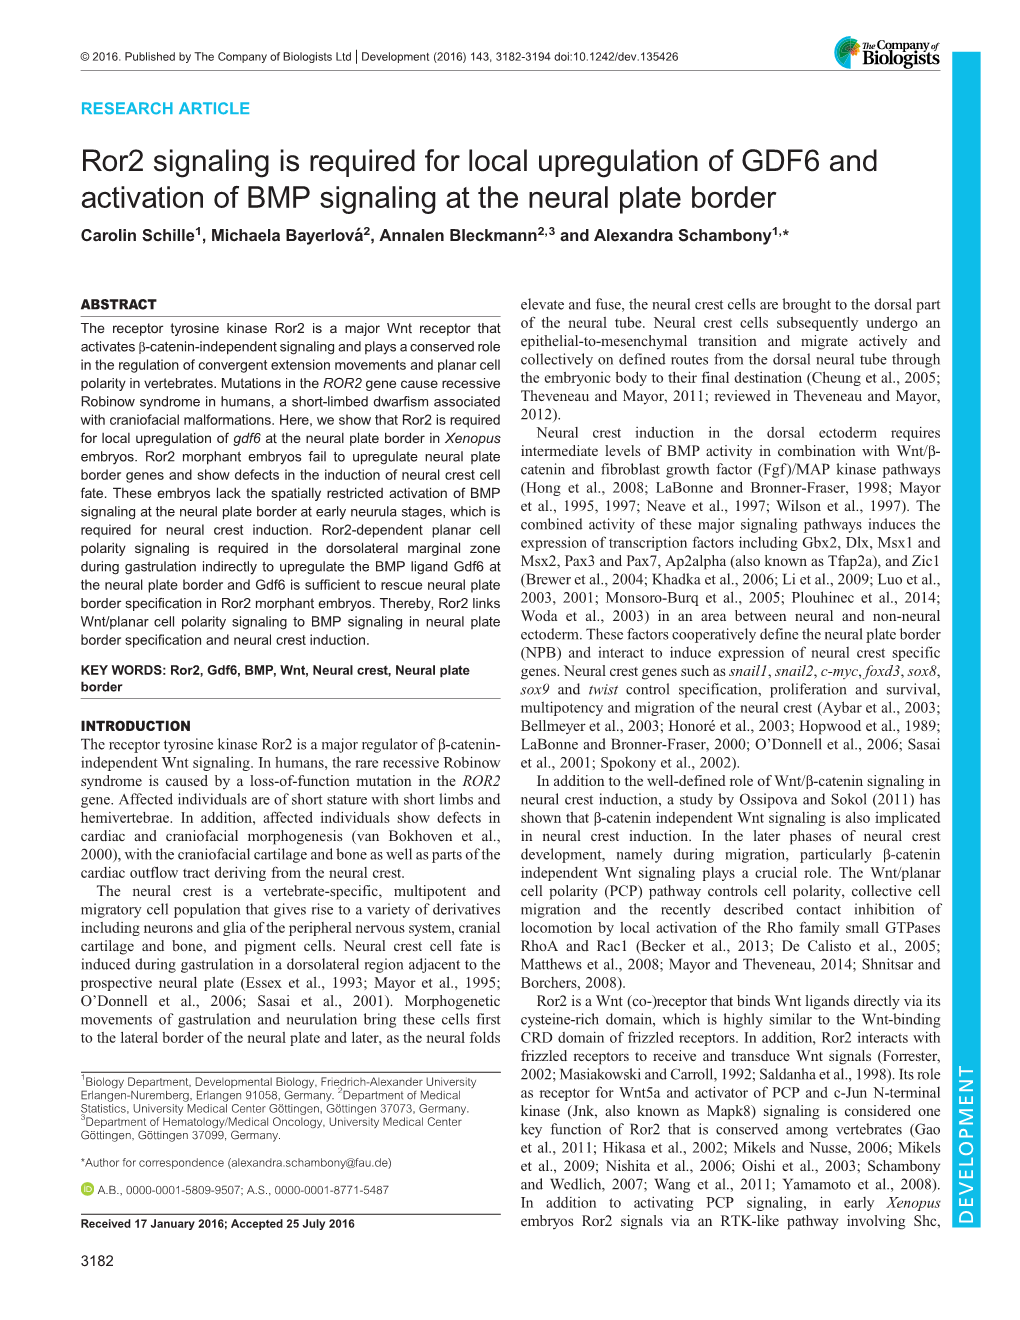 Ror2 Signaling Is Required for Local Upregulation of GDF6 and Activation of BMP Signaling at the Neural Plate Border